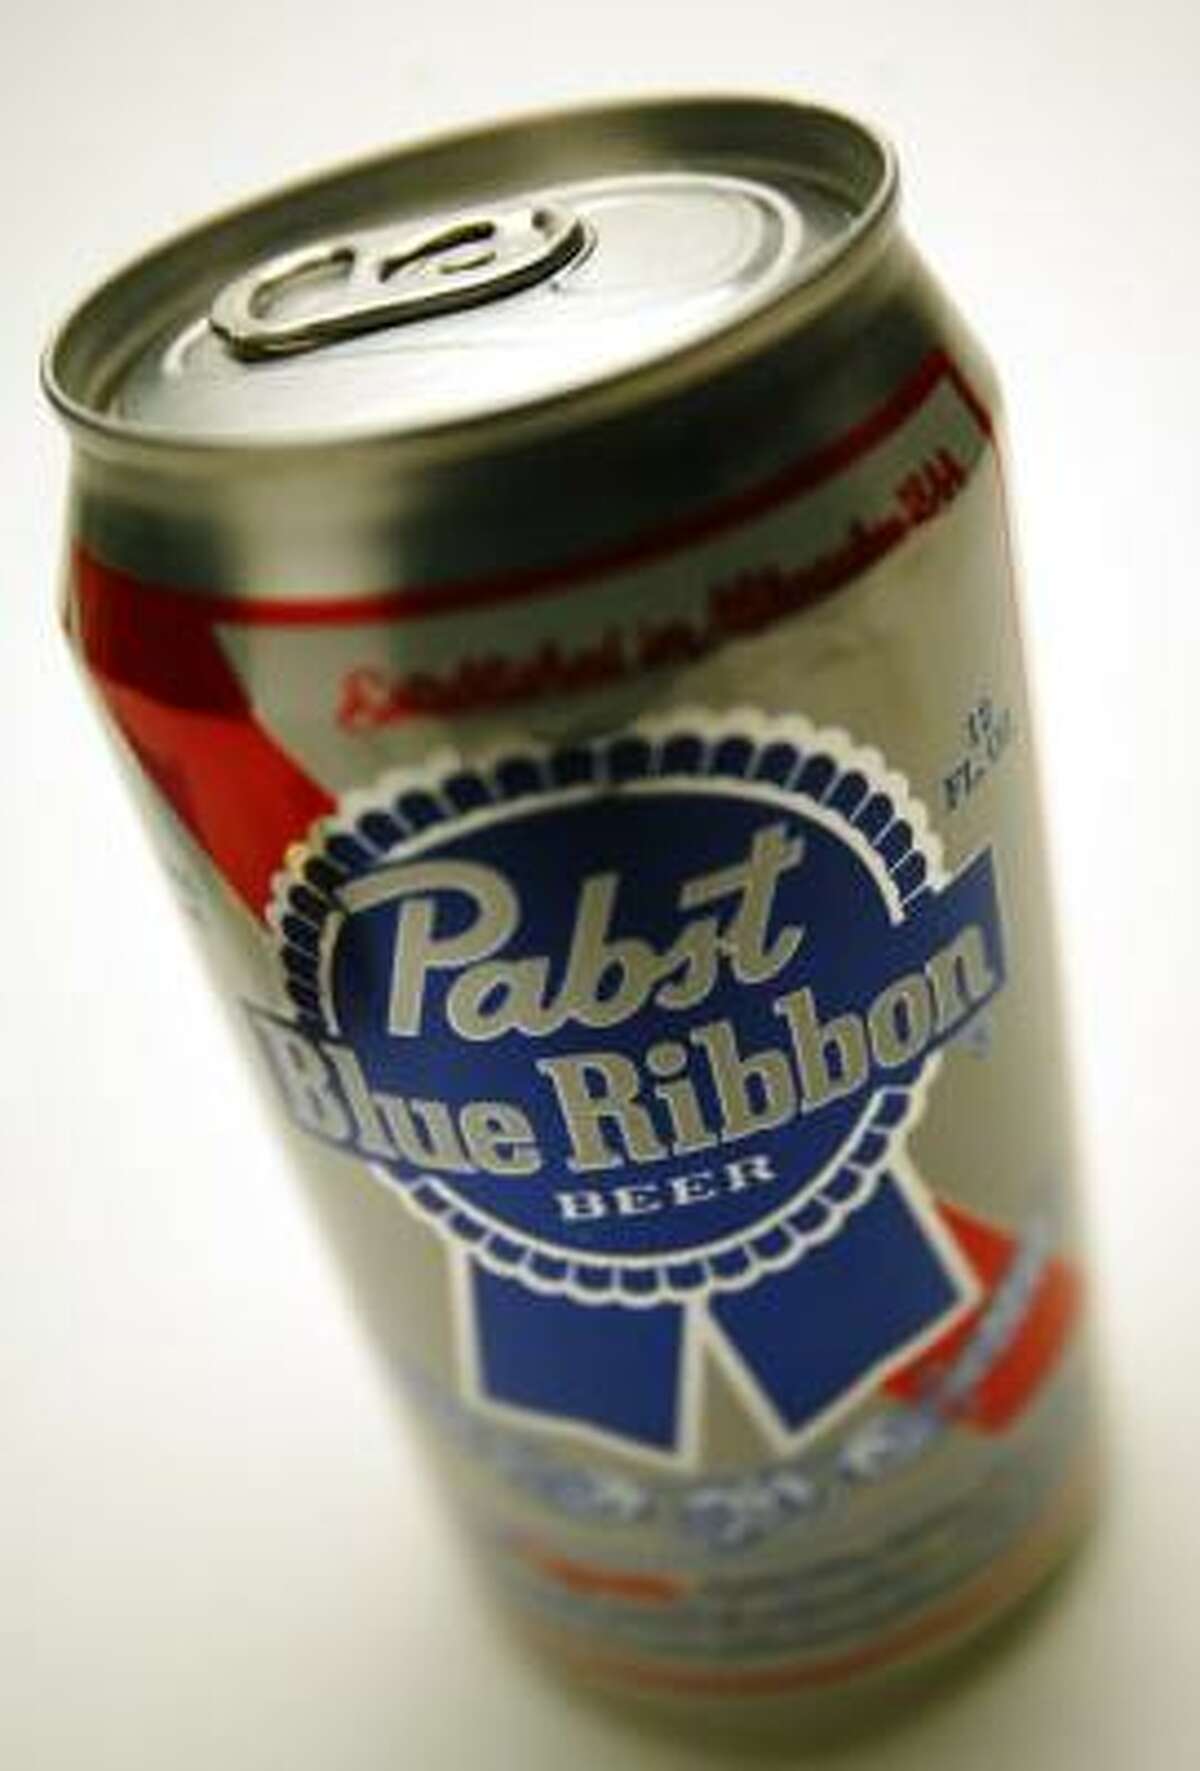 Pabst Brewing Co. could claim it's the largest American-owned beer company to U.S. drinkers unsettled by the pending sale of Anheuser-Busch to foreign ownership.